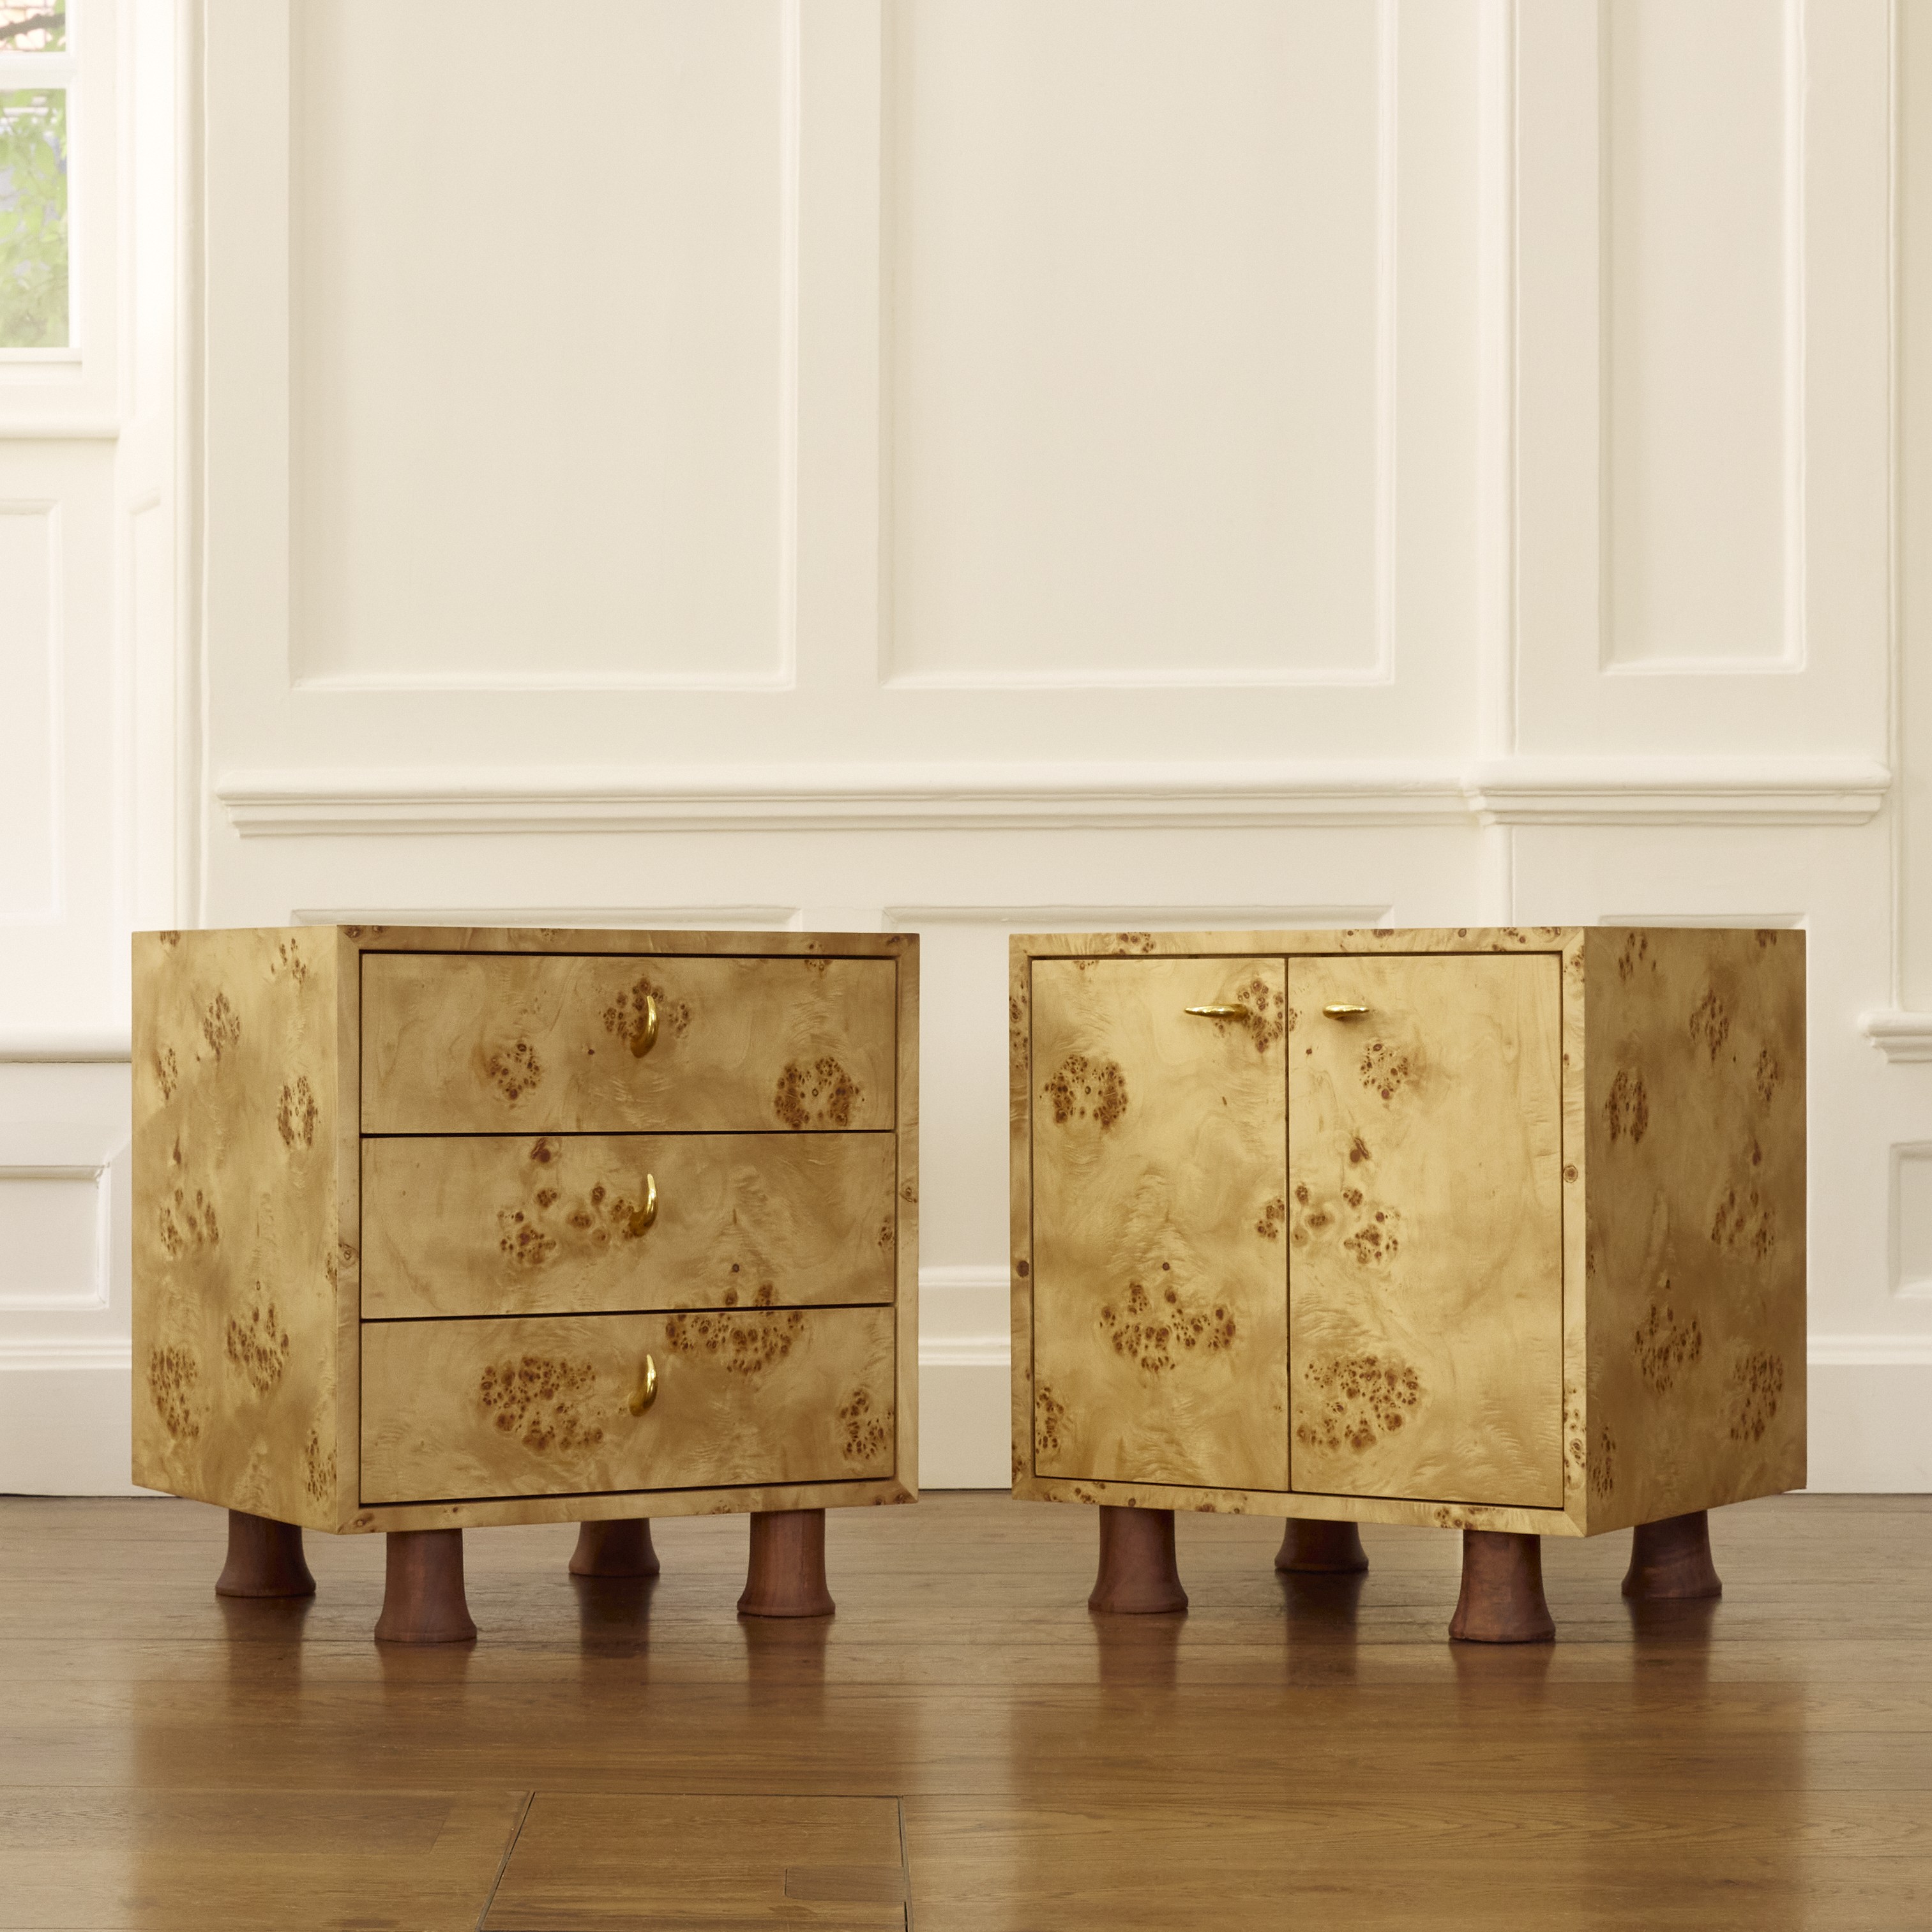 a pair of golden chests sitting on top of a hard wood floor